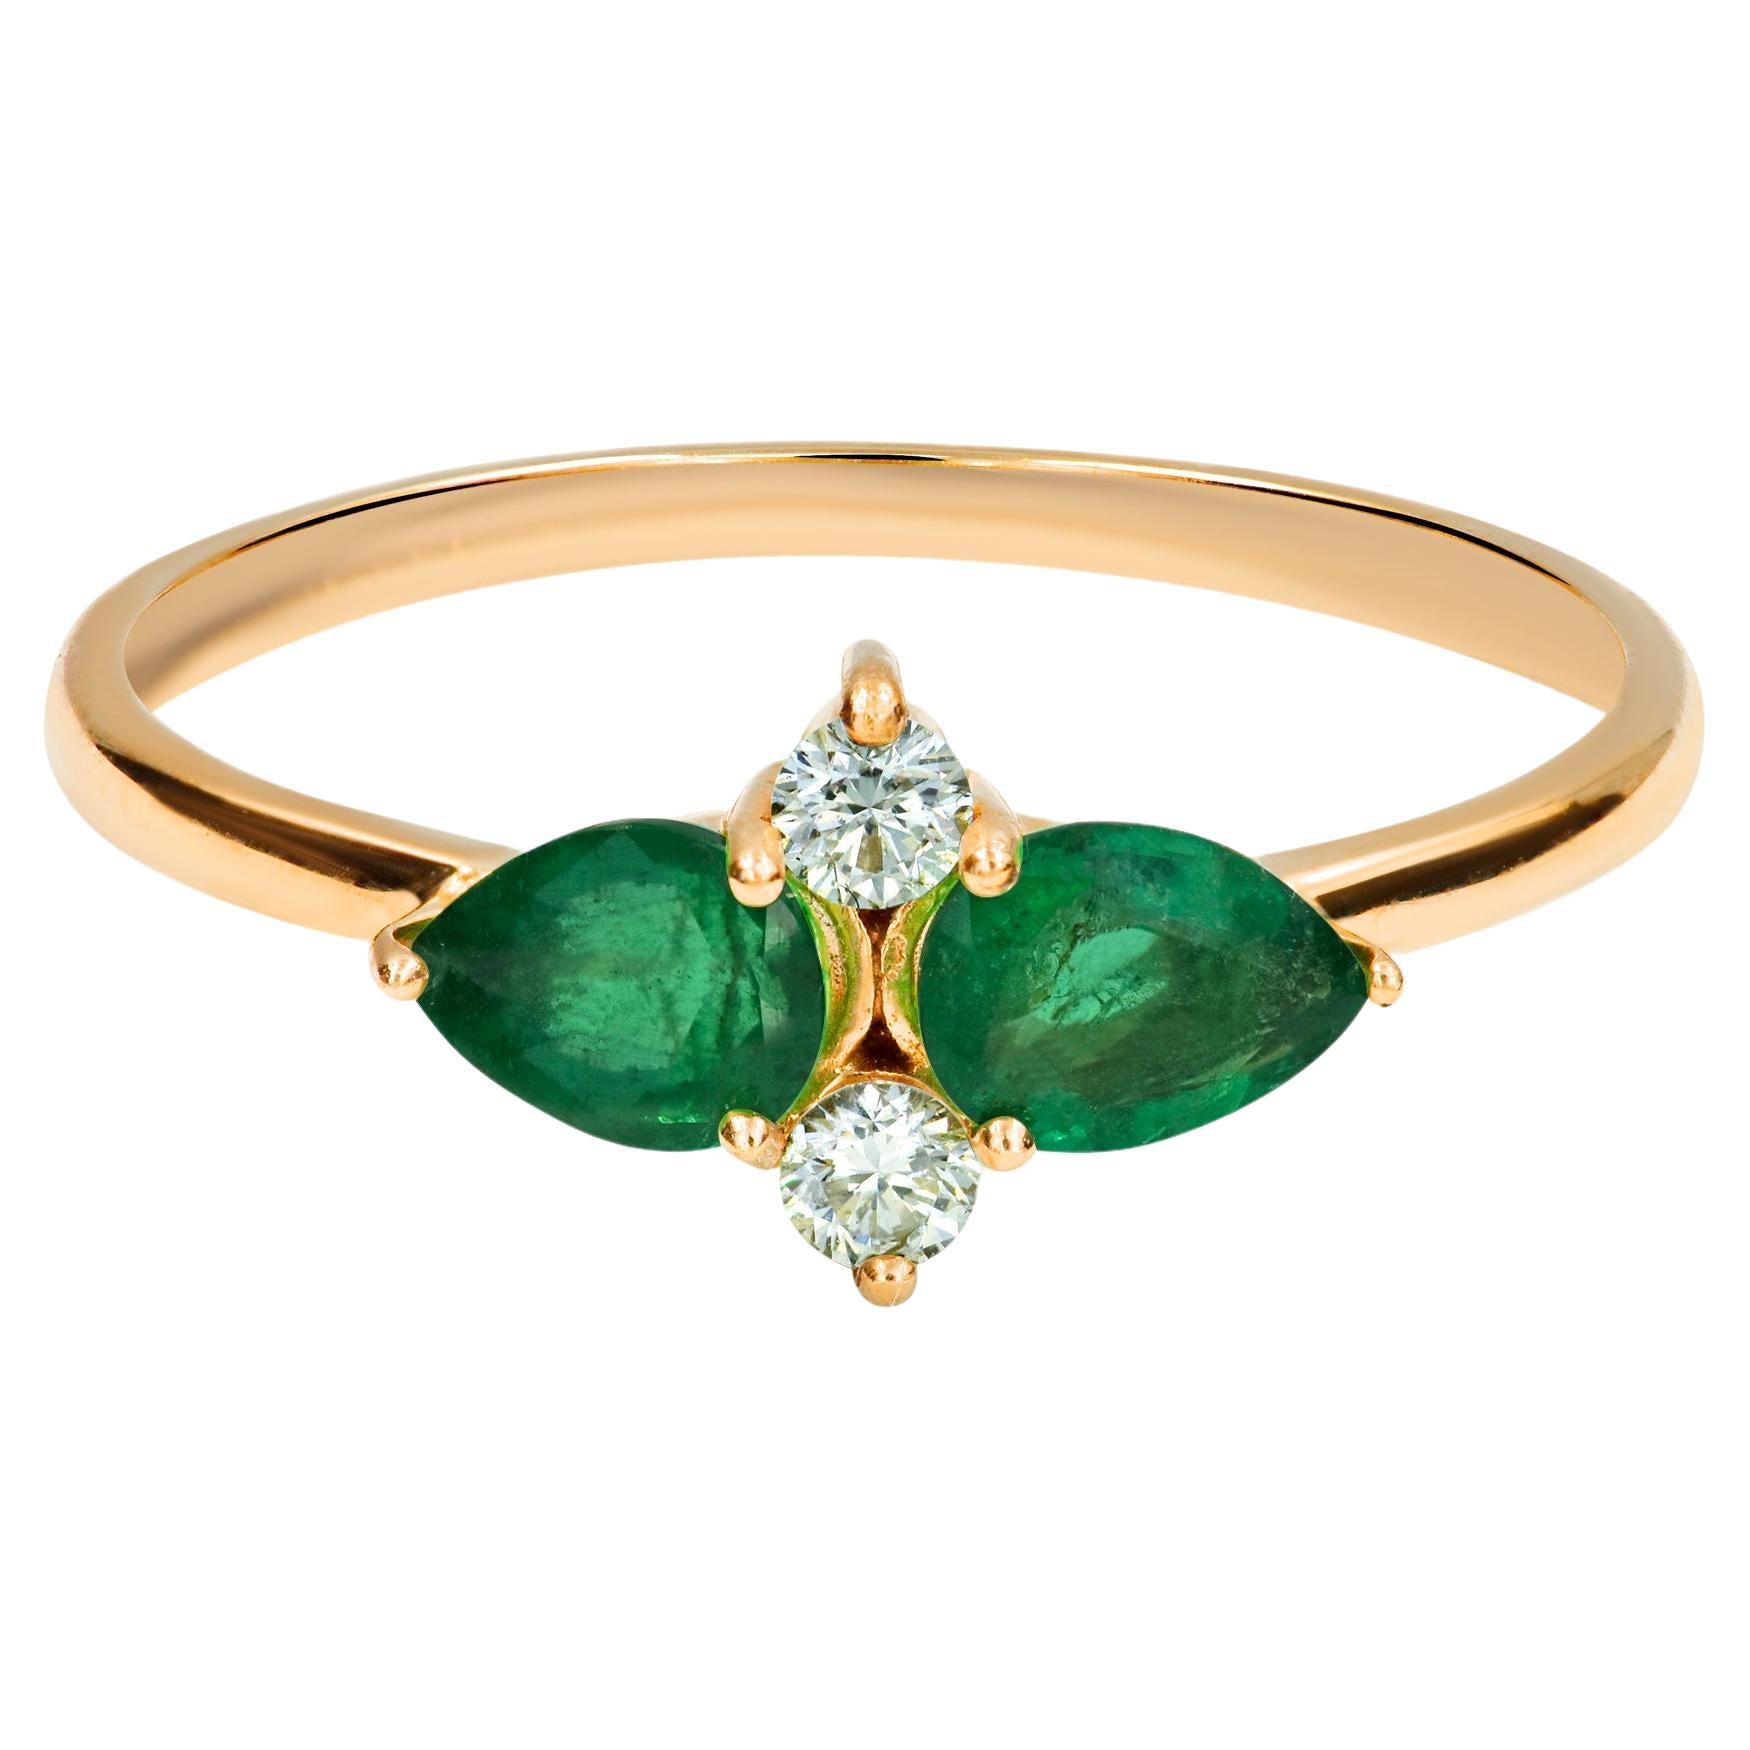 For Sale:  14k Gold Pear Shape 0.56 Carat Emerald and Diamond Engagement Ring